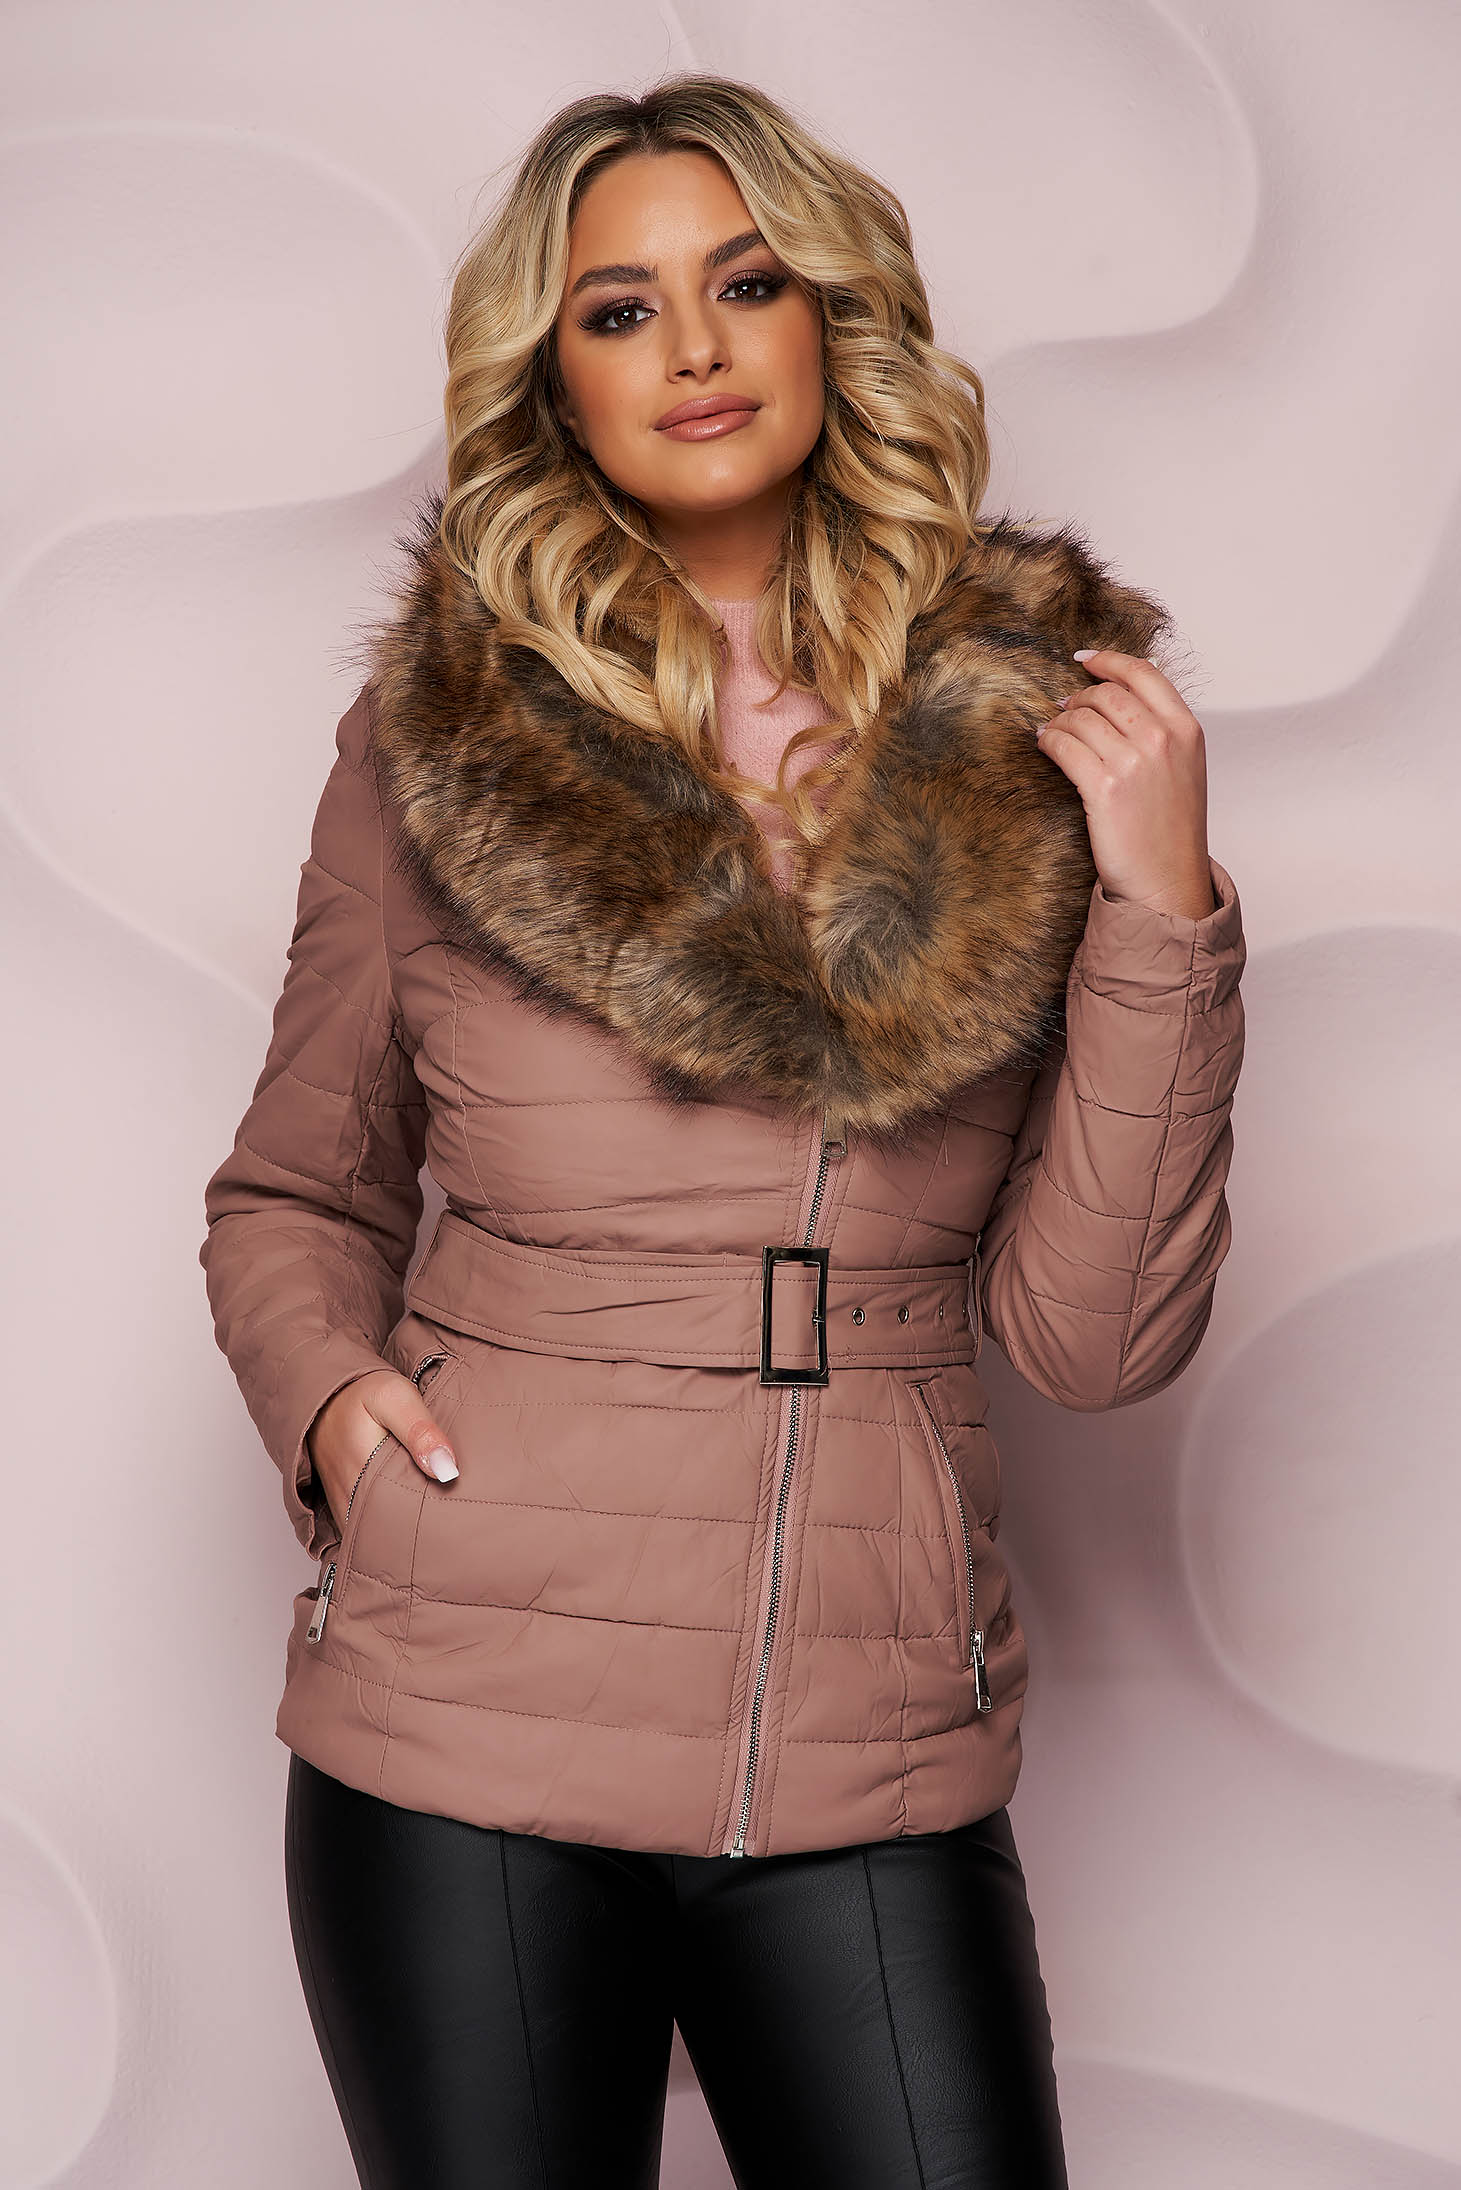 Lightpink jacket tented fur collar from ecological leather